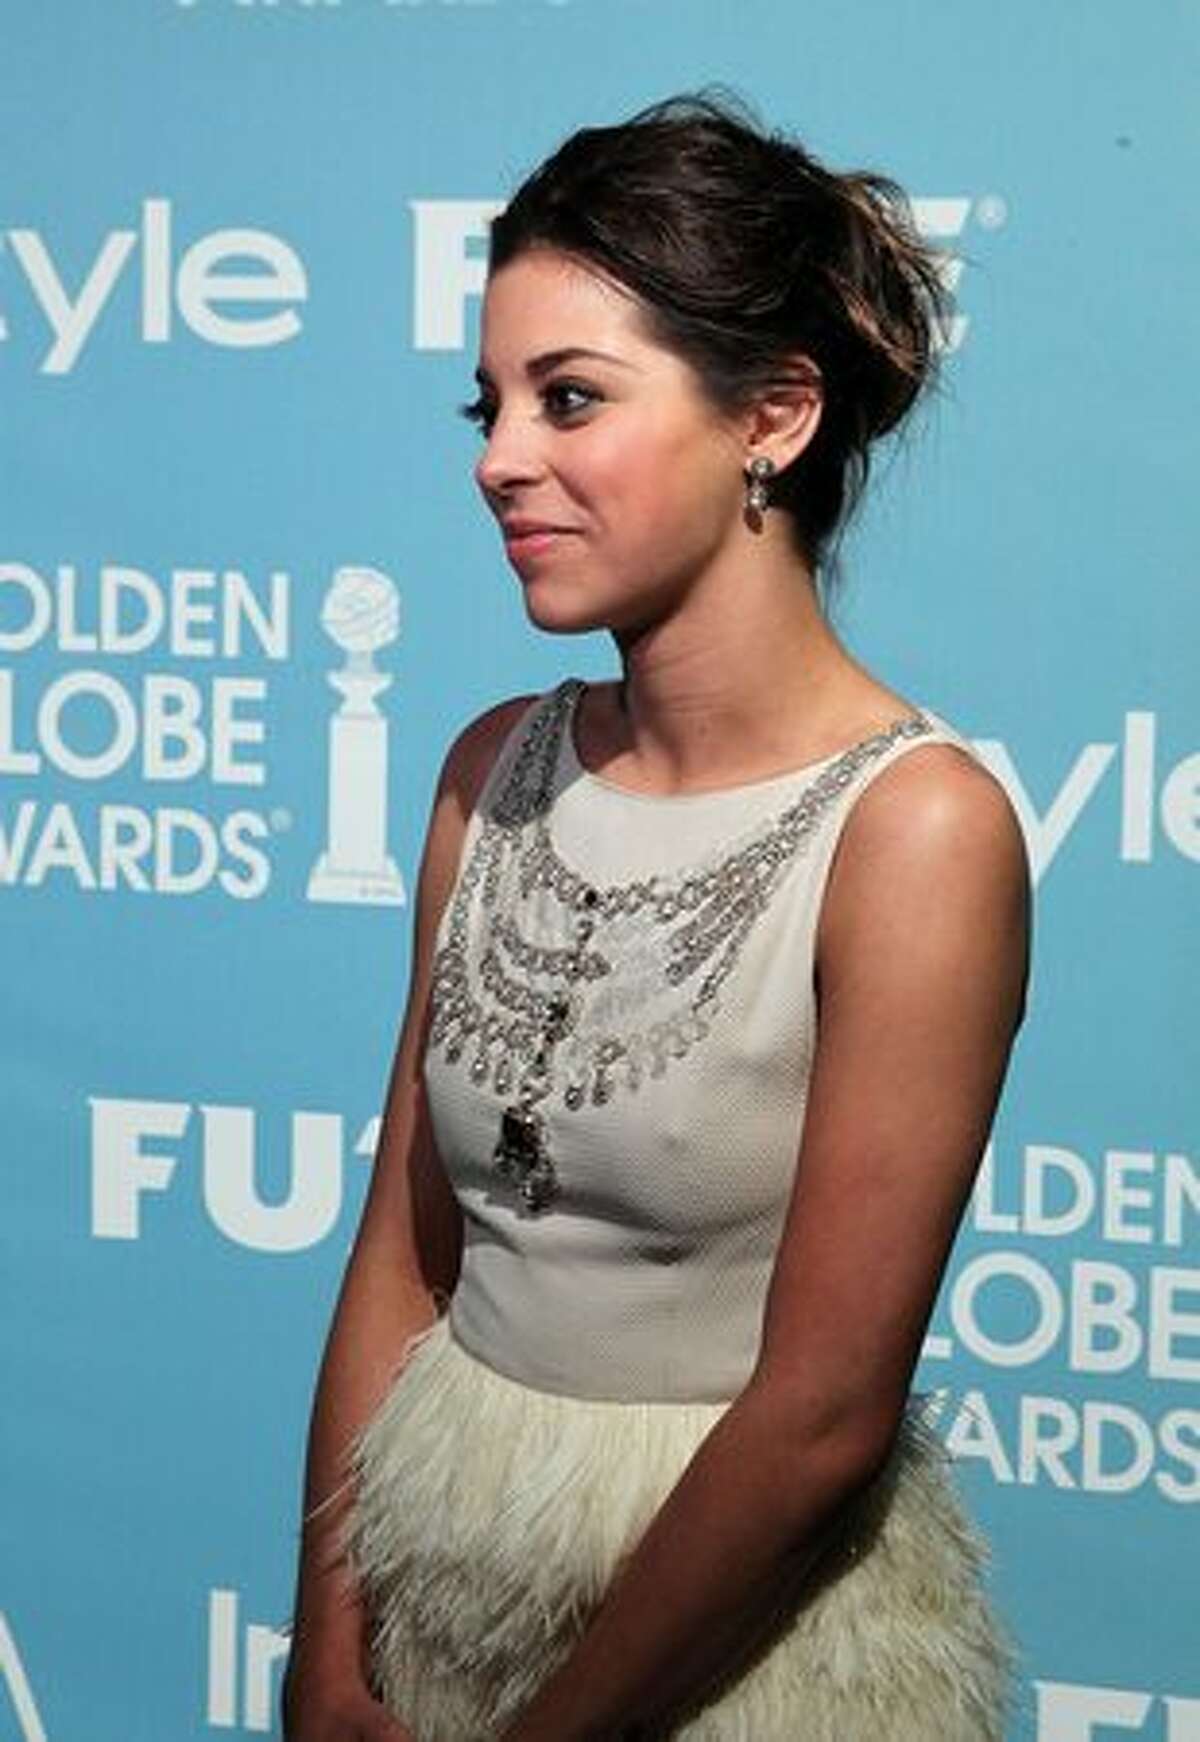 Gia Mantegna, 20, is an actress and the daughter of actor Joe Mantegna. As Miss Golden Globe, she will assist in the presentation of Golden Globe Awards, a highlight of the Hollywood awards season, to be held Jan. 16, 2011.